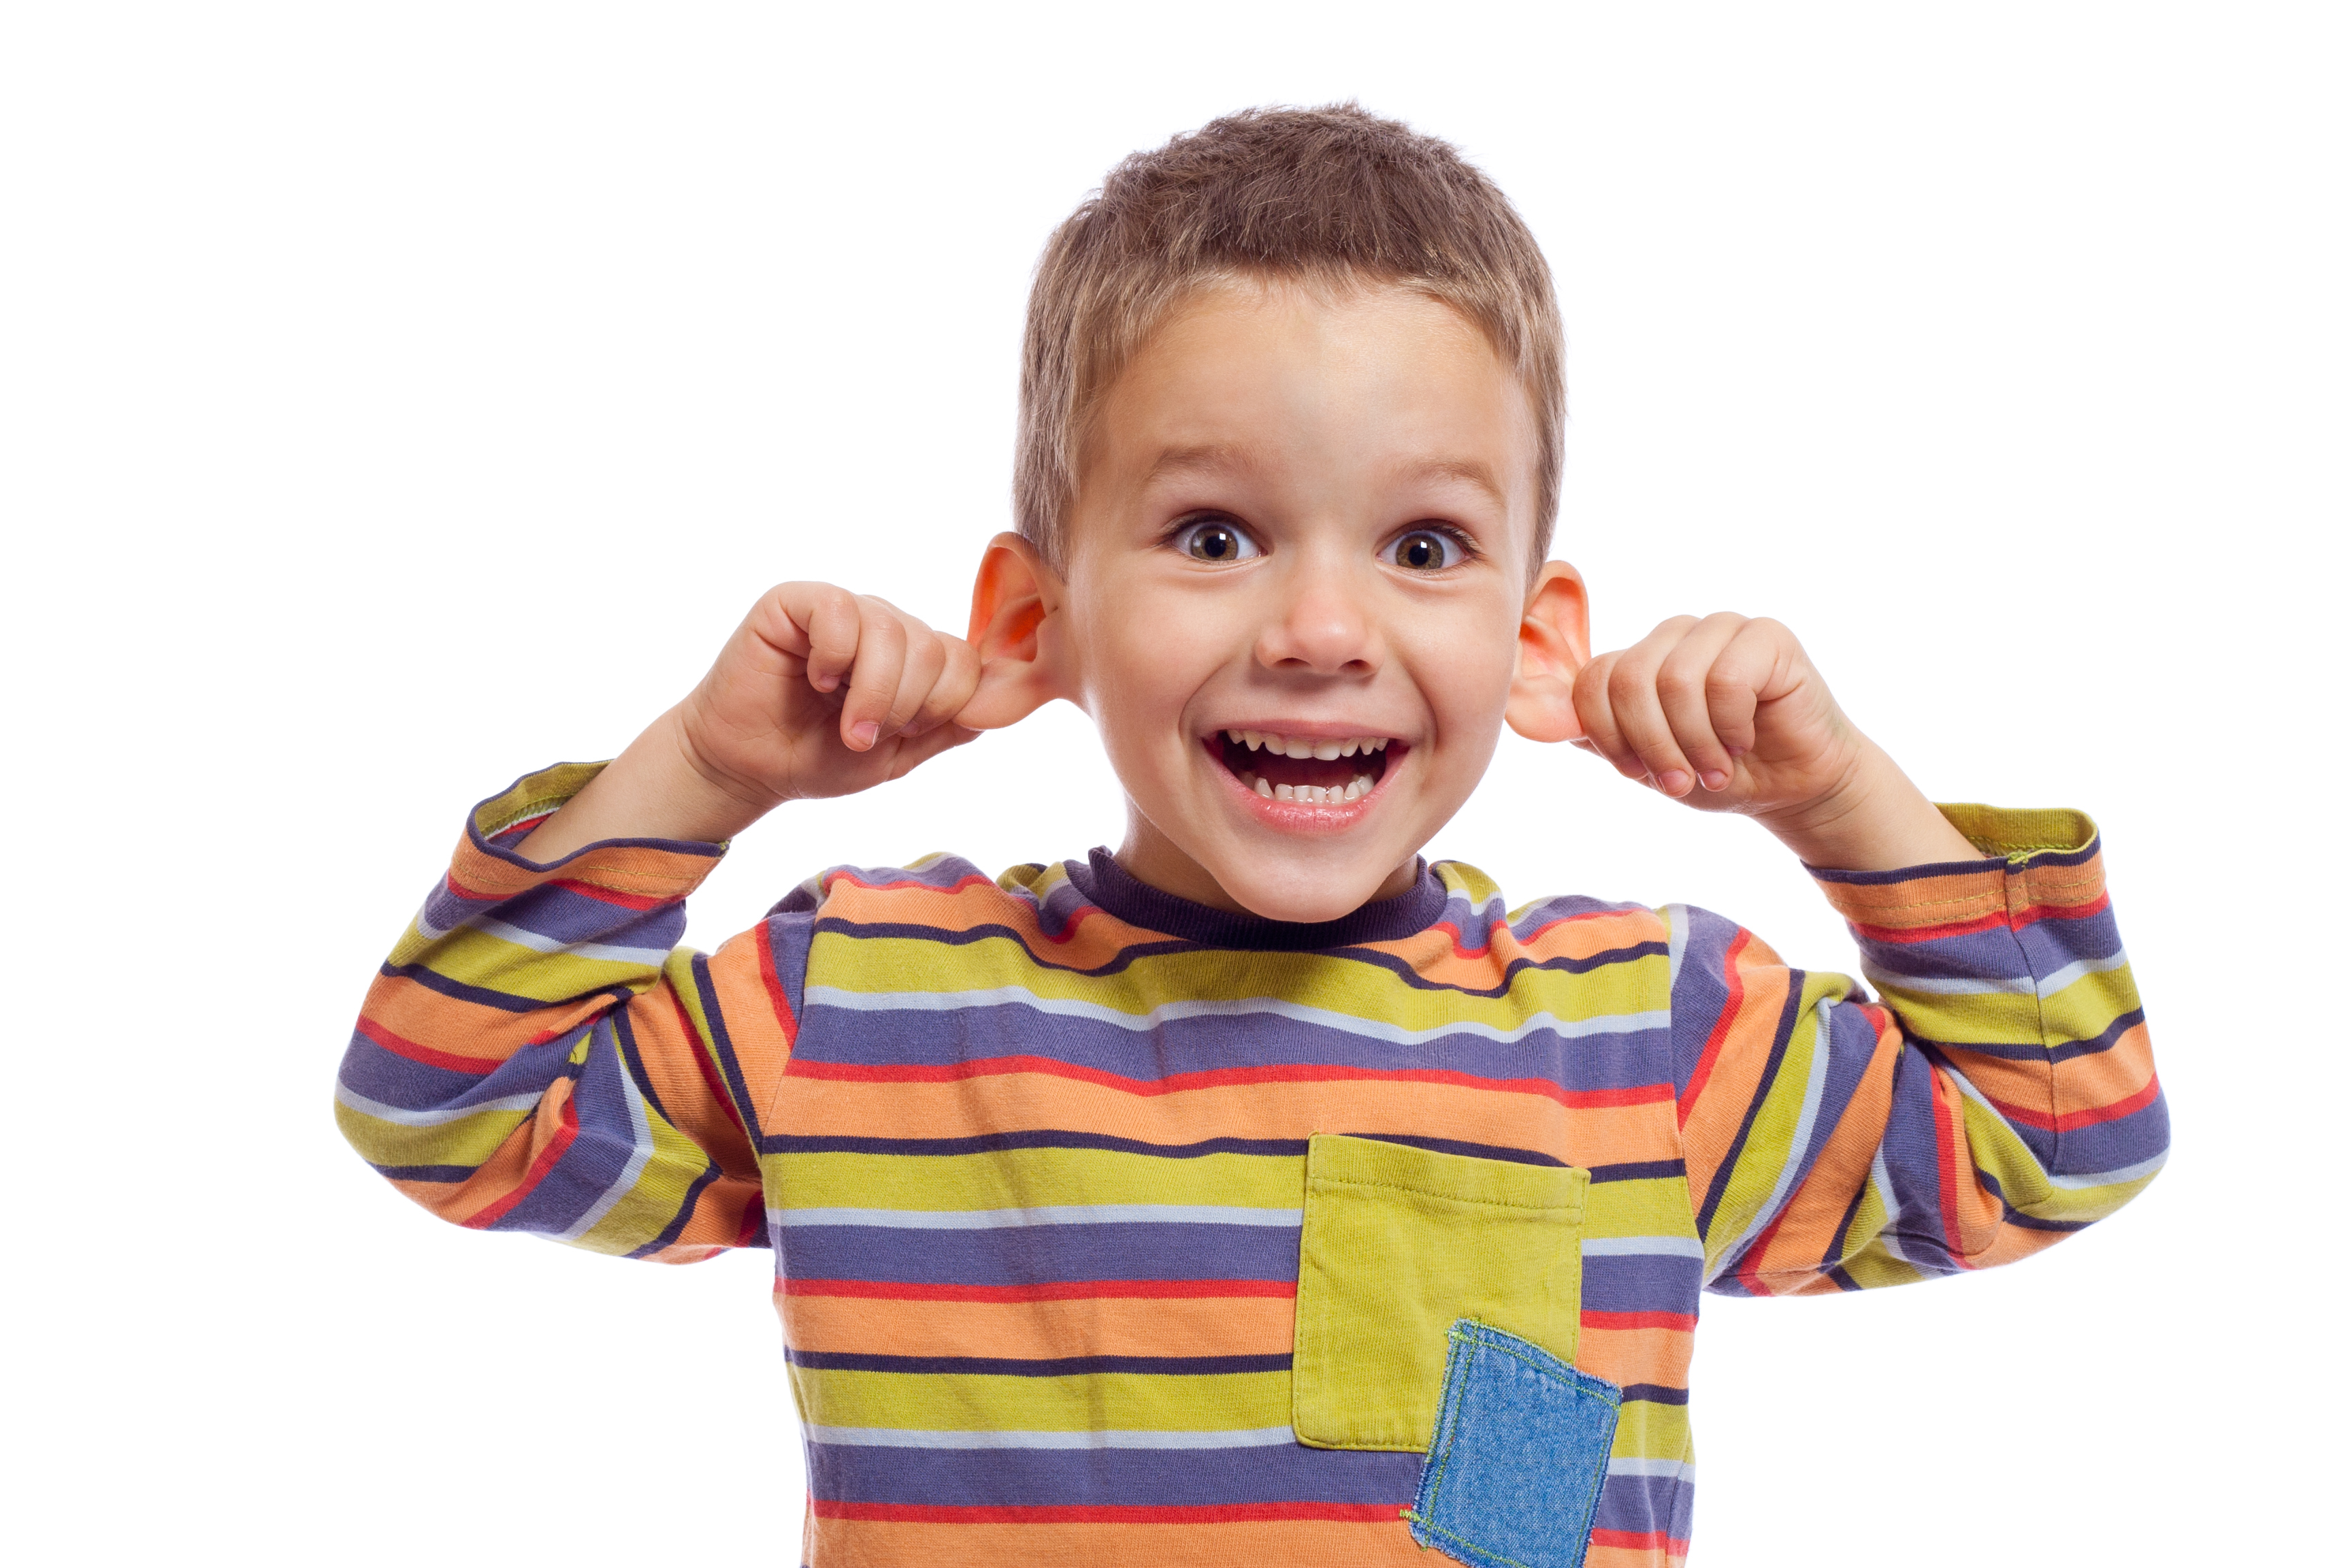 A young boy pulling on his ears | Source: Shutterstock